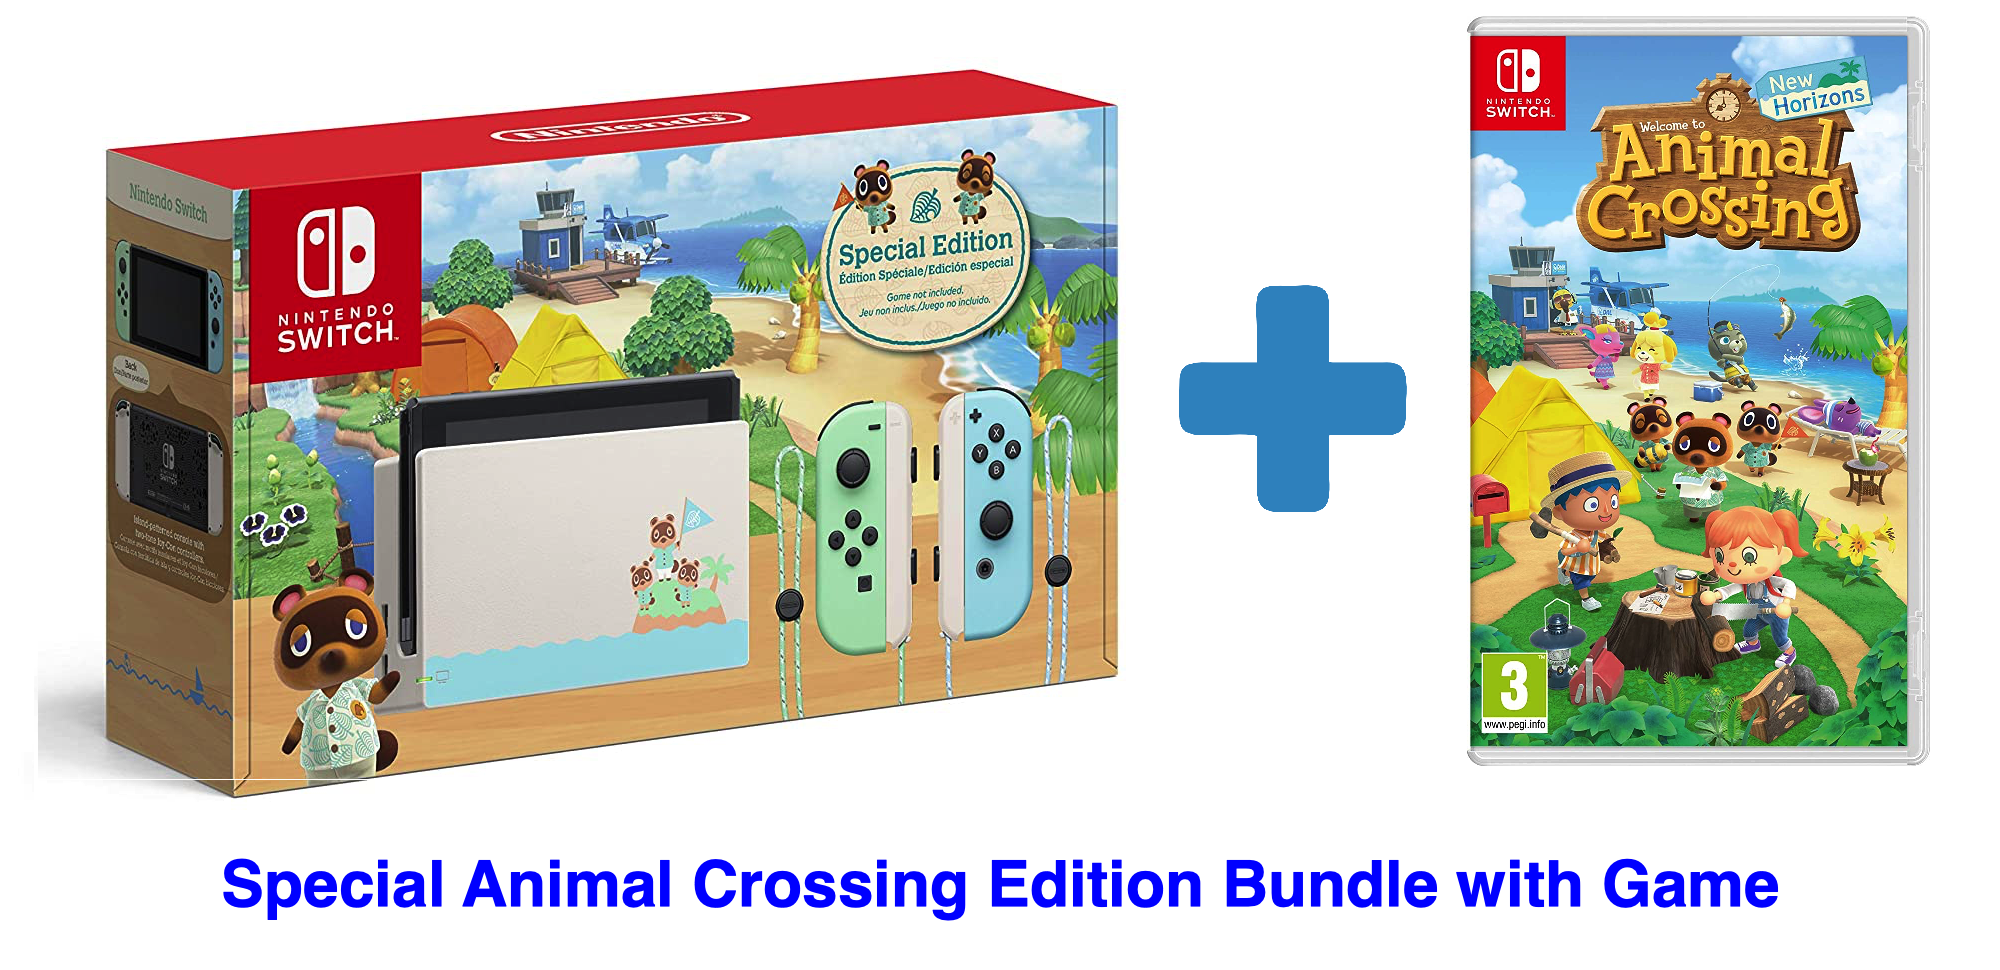 New Nintendo Switch Animal Crossing: New Horizons Edition Bundle with Animal Crossing: New Horizons NS Game Disc - 2020 Best Game!